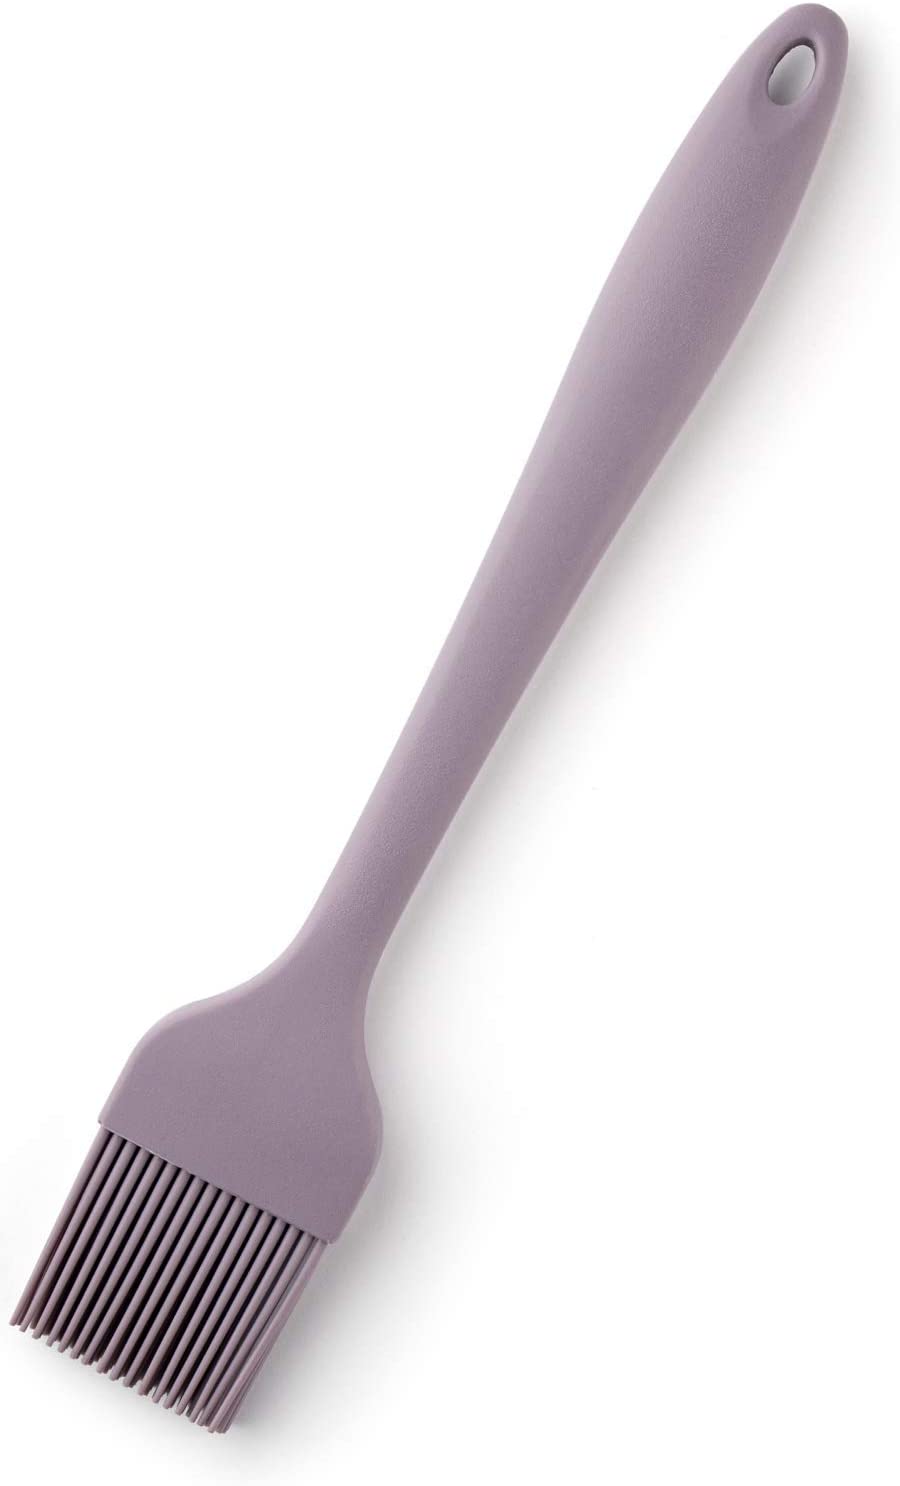 Sillicone Pastry Brush